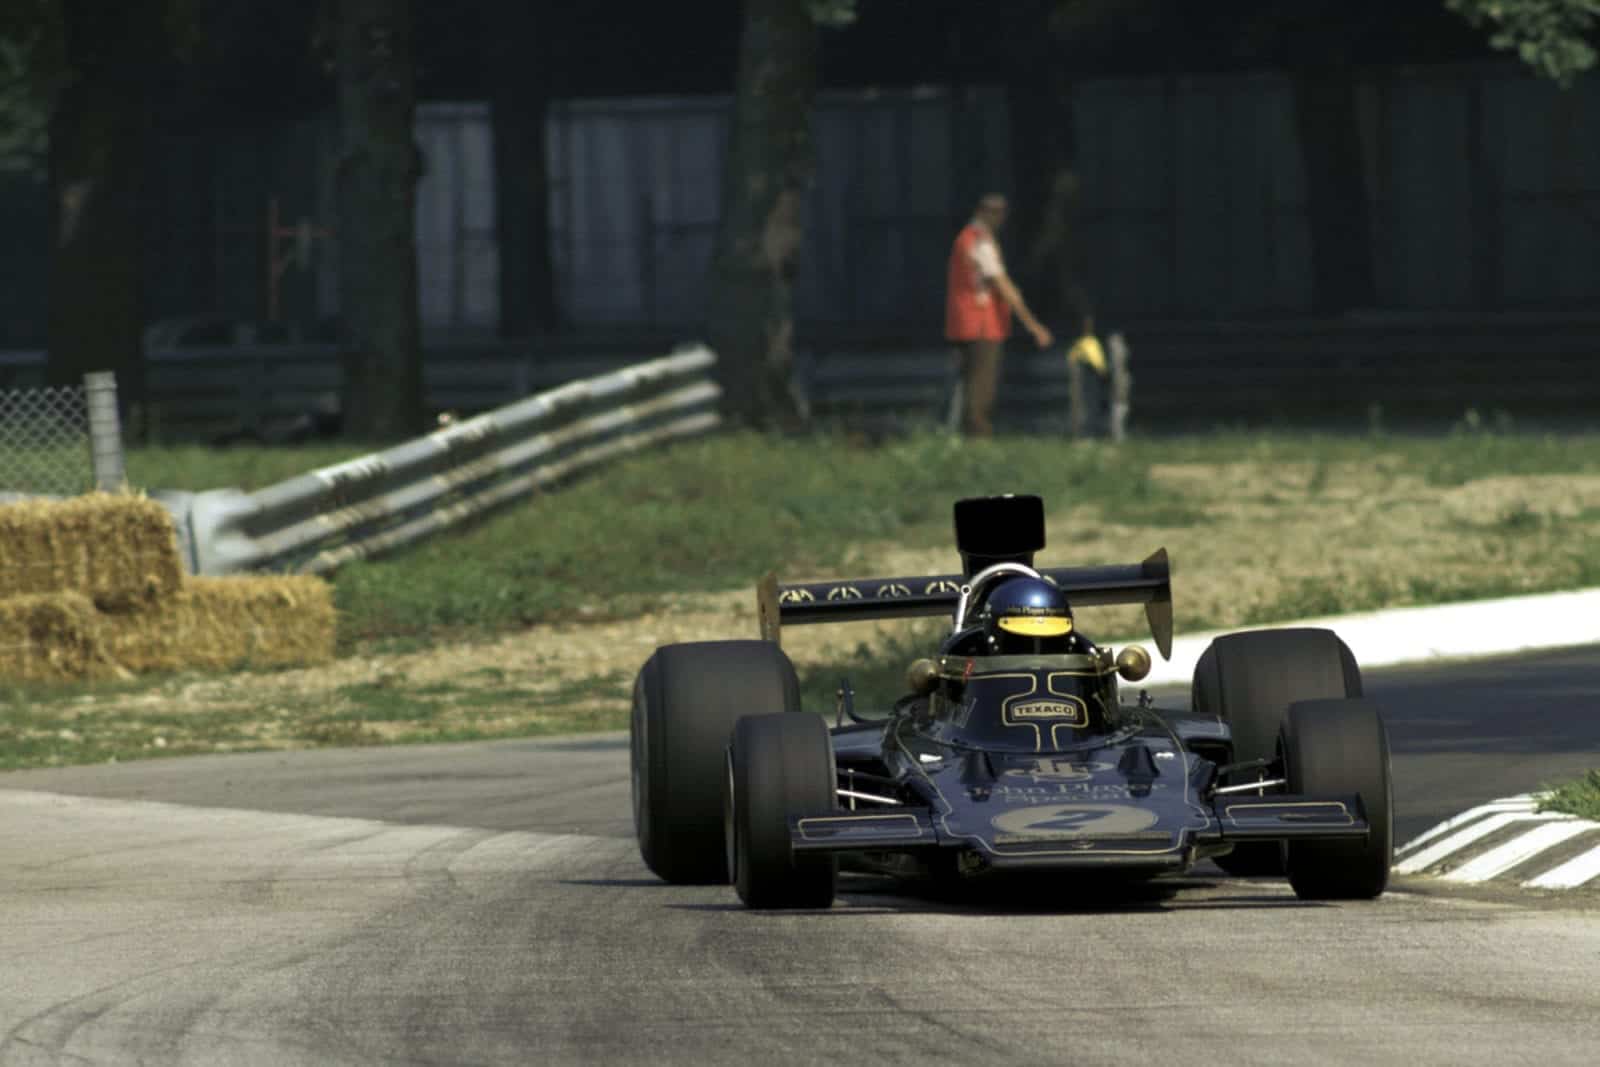 Ronnie Peterson slides through the chicane in Lotus at the 1973 Italian Grand Prix, Monza.